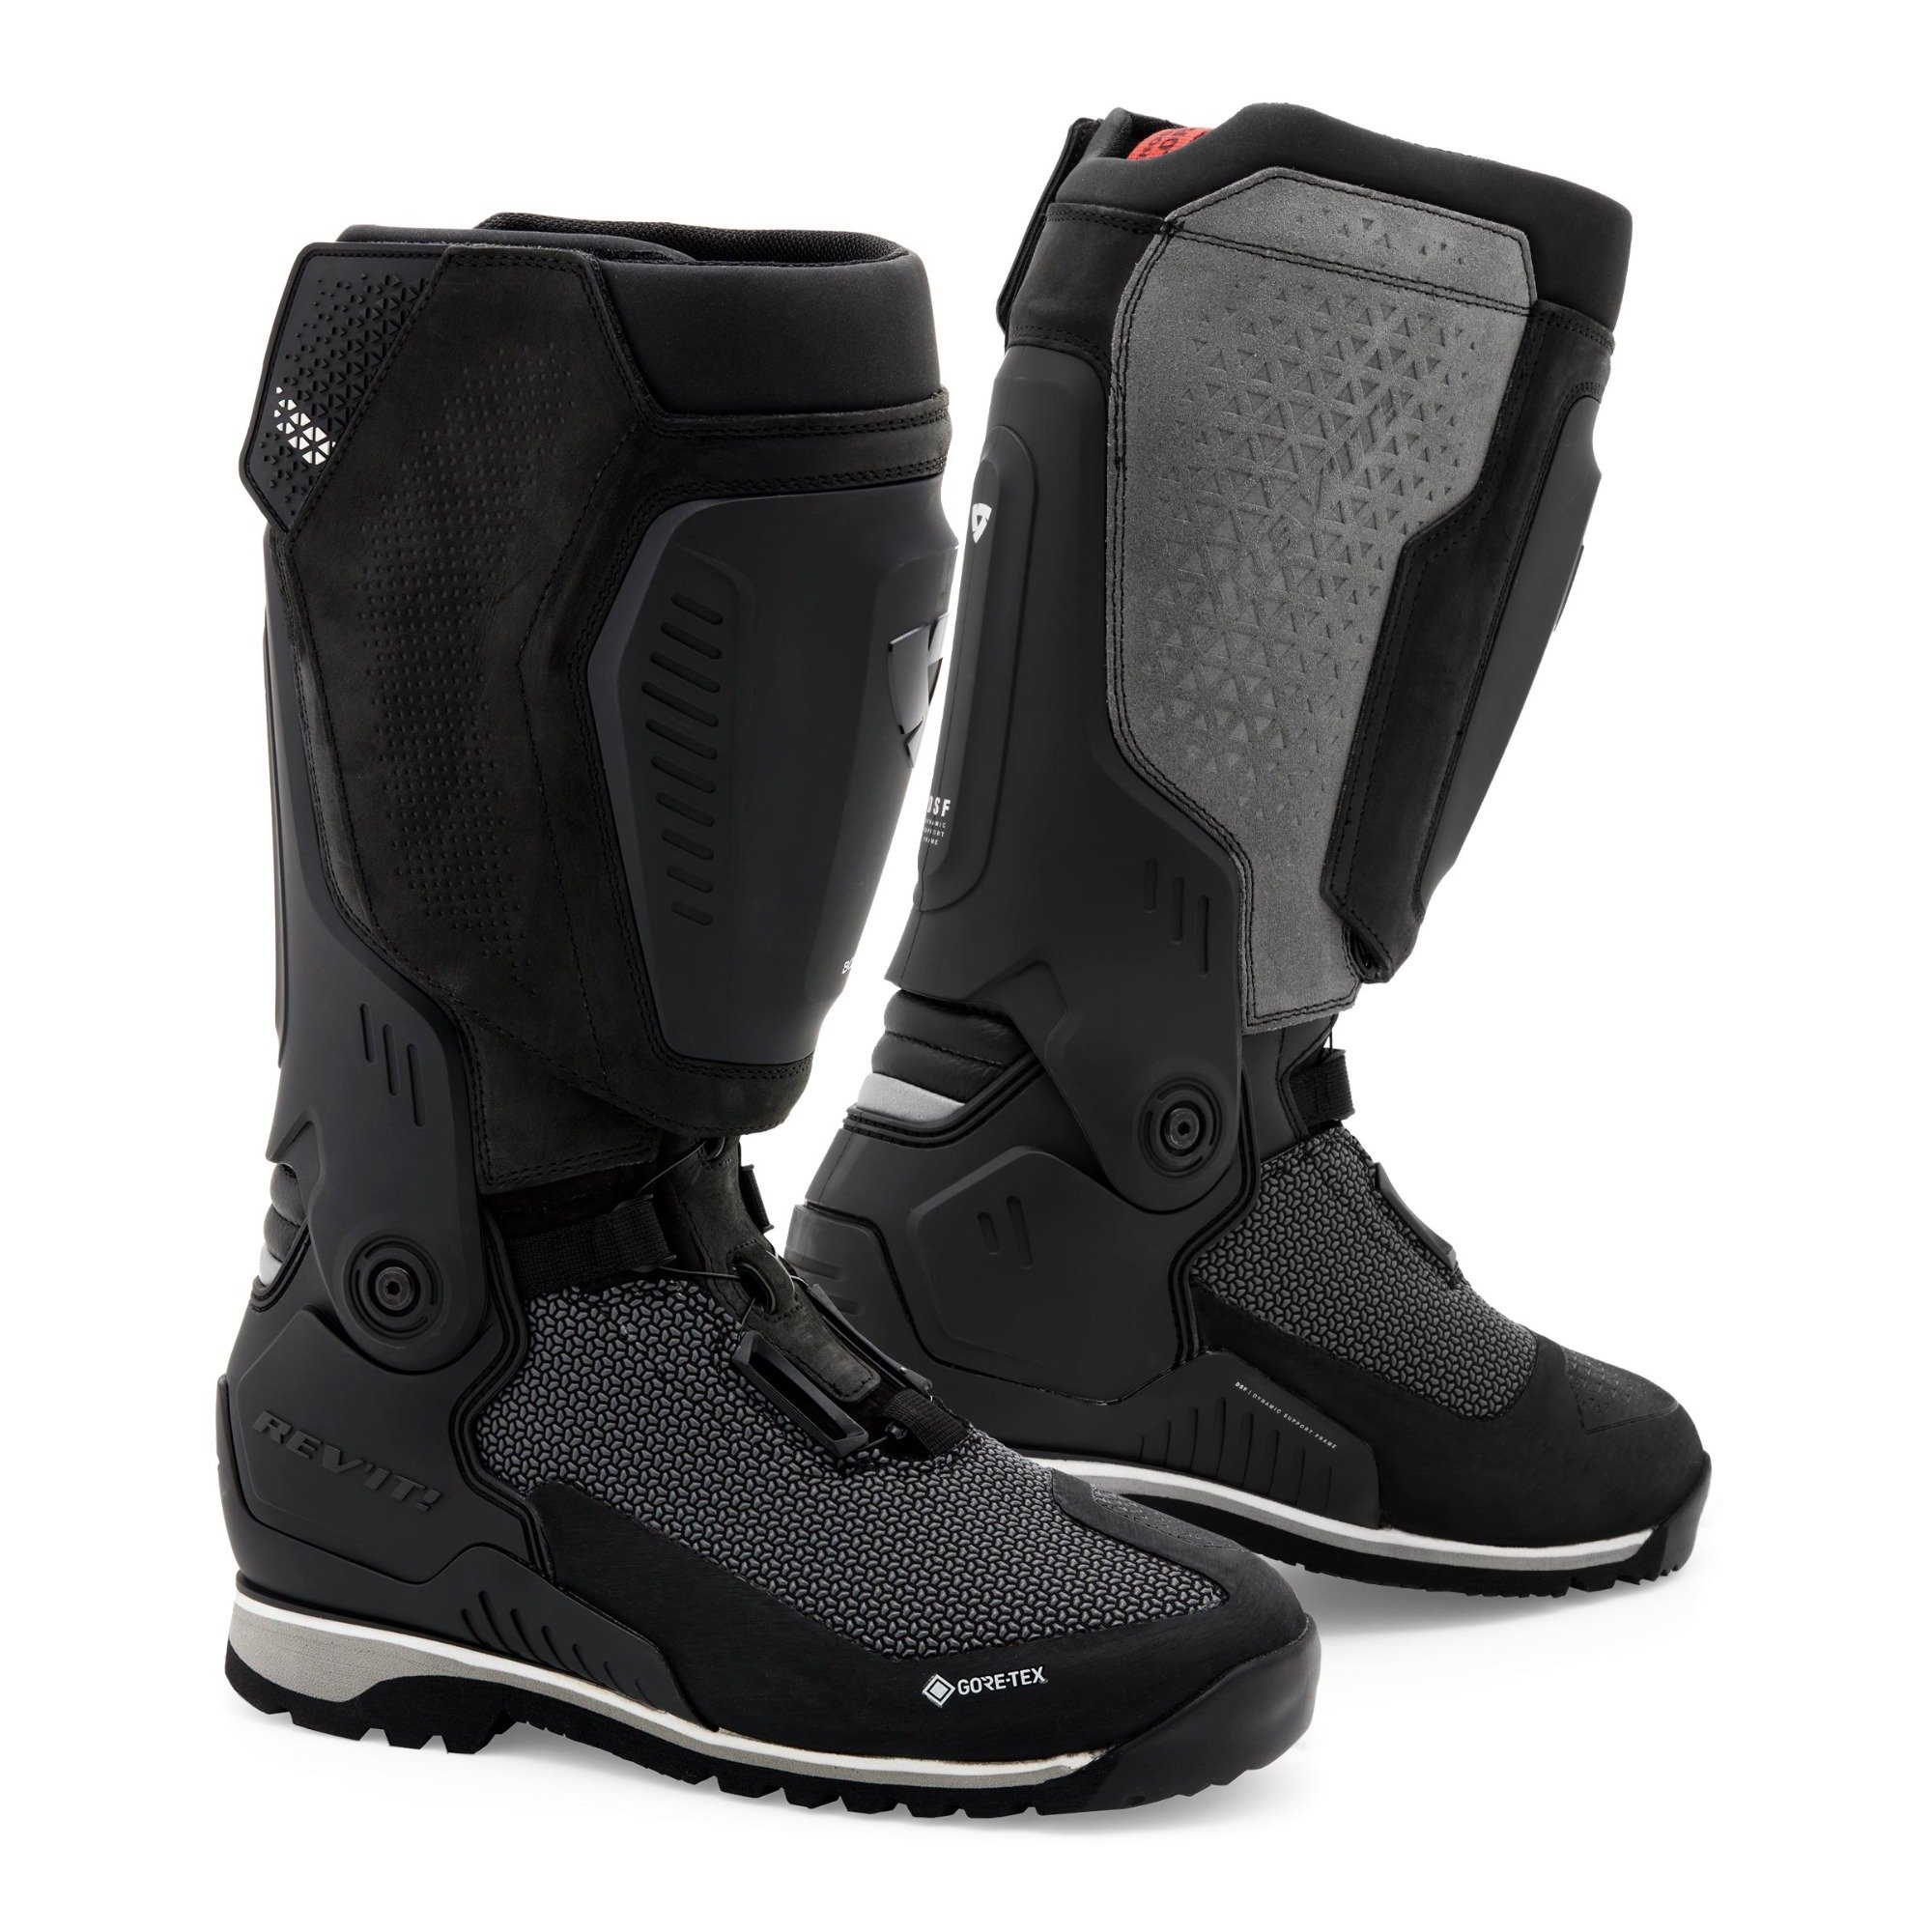 Image of REV'IT! Expedition GTX Boots Black Grey Size 41 ID 8700001327886